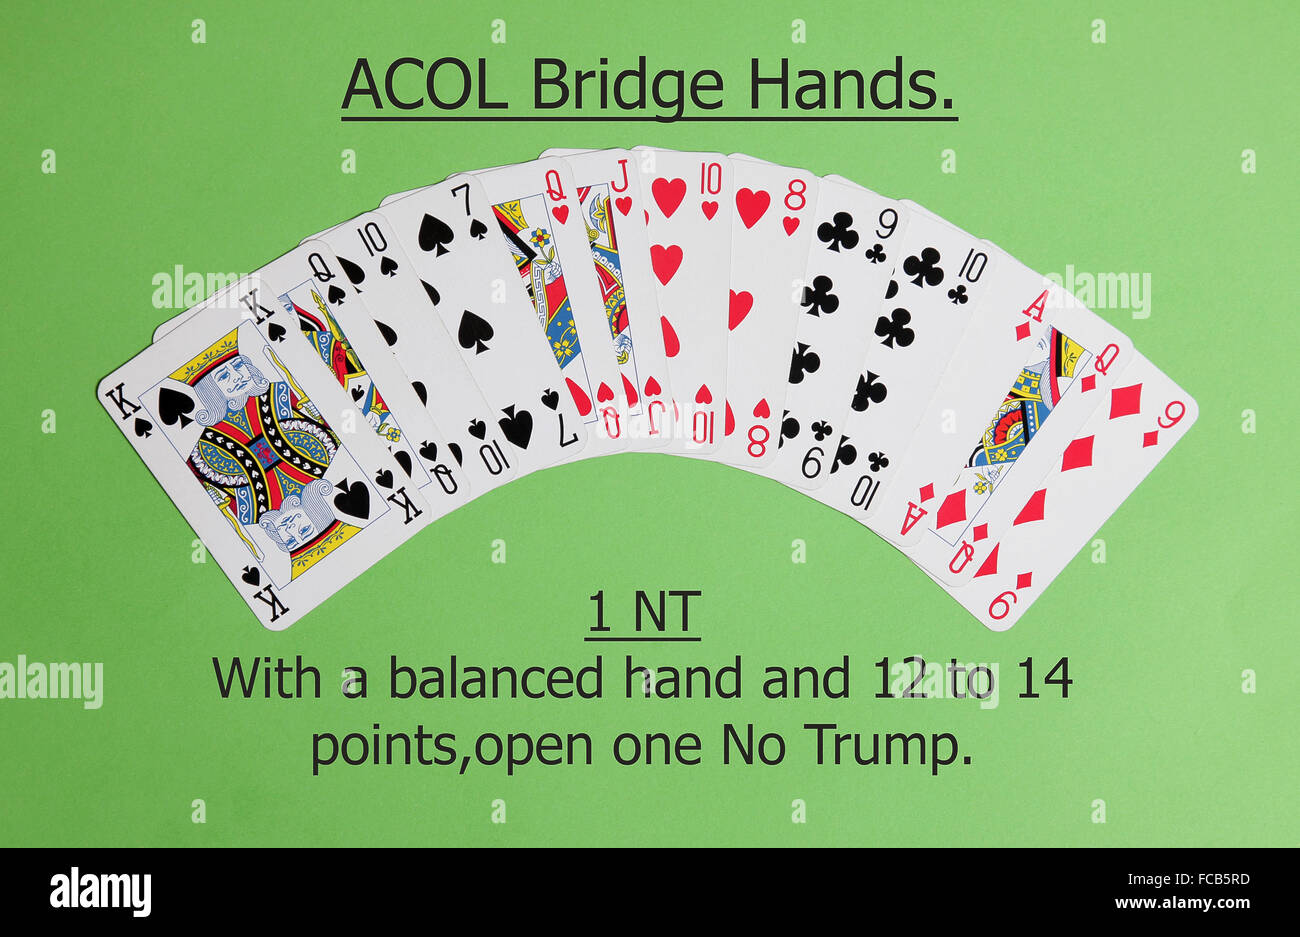 ACOL Contract Bridge Hand. With 12 to 14 points and a balanced hand open one no trump. Stock Photo